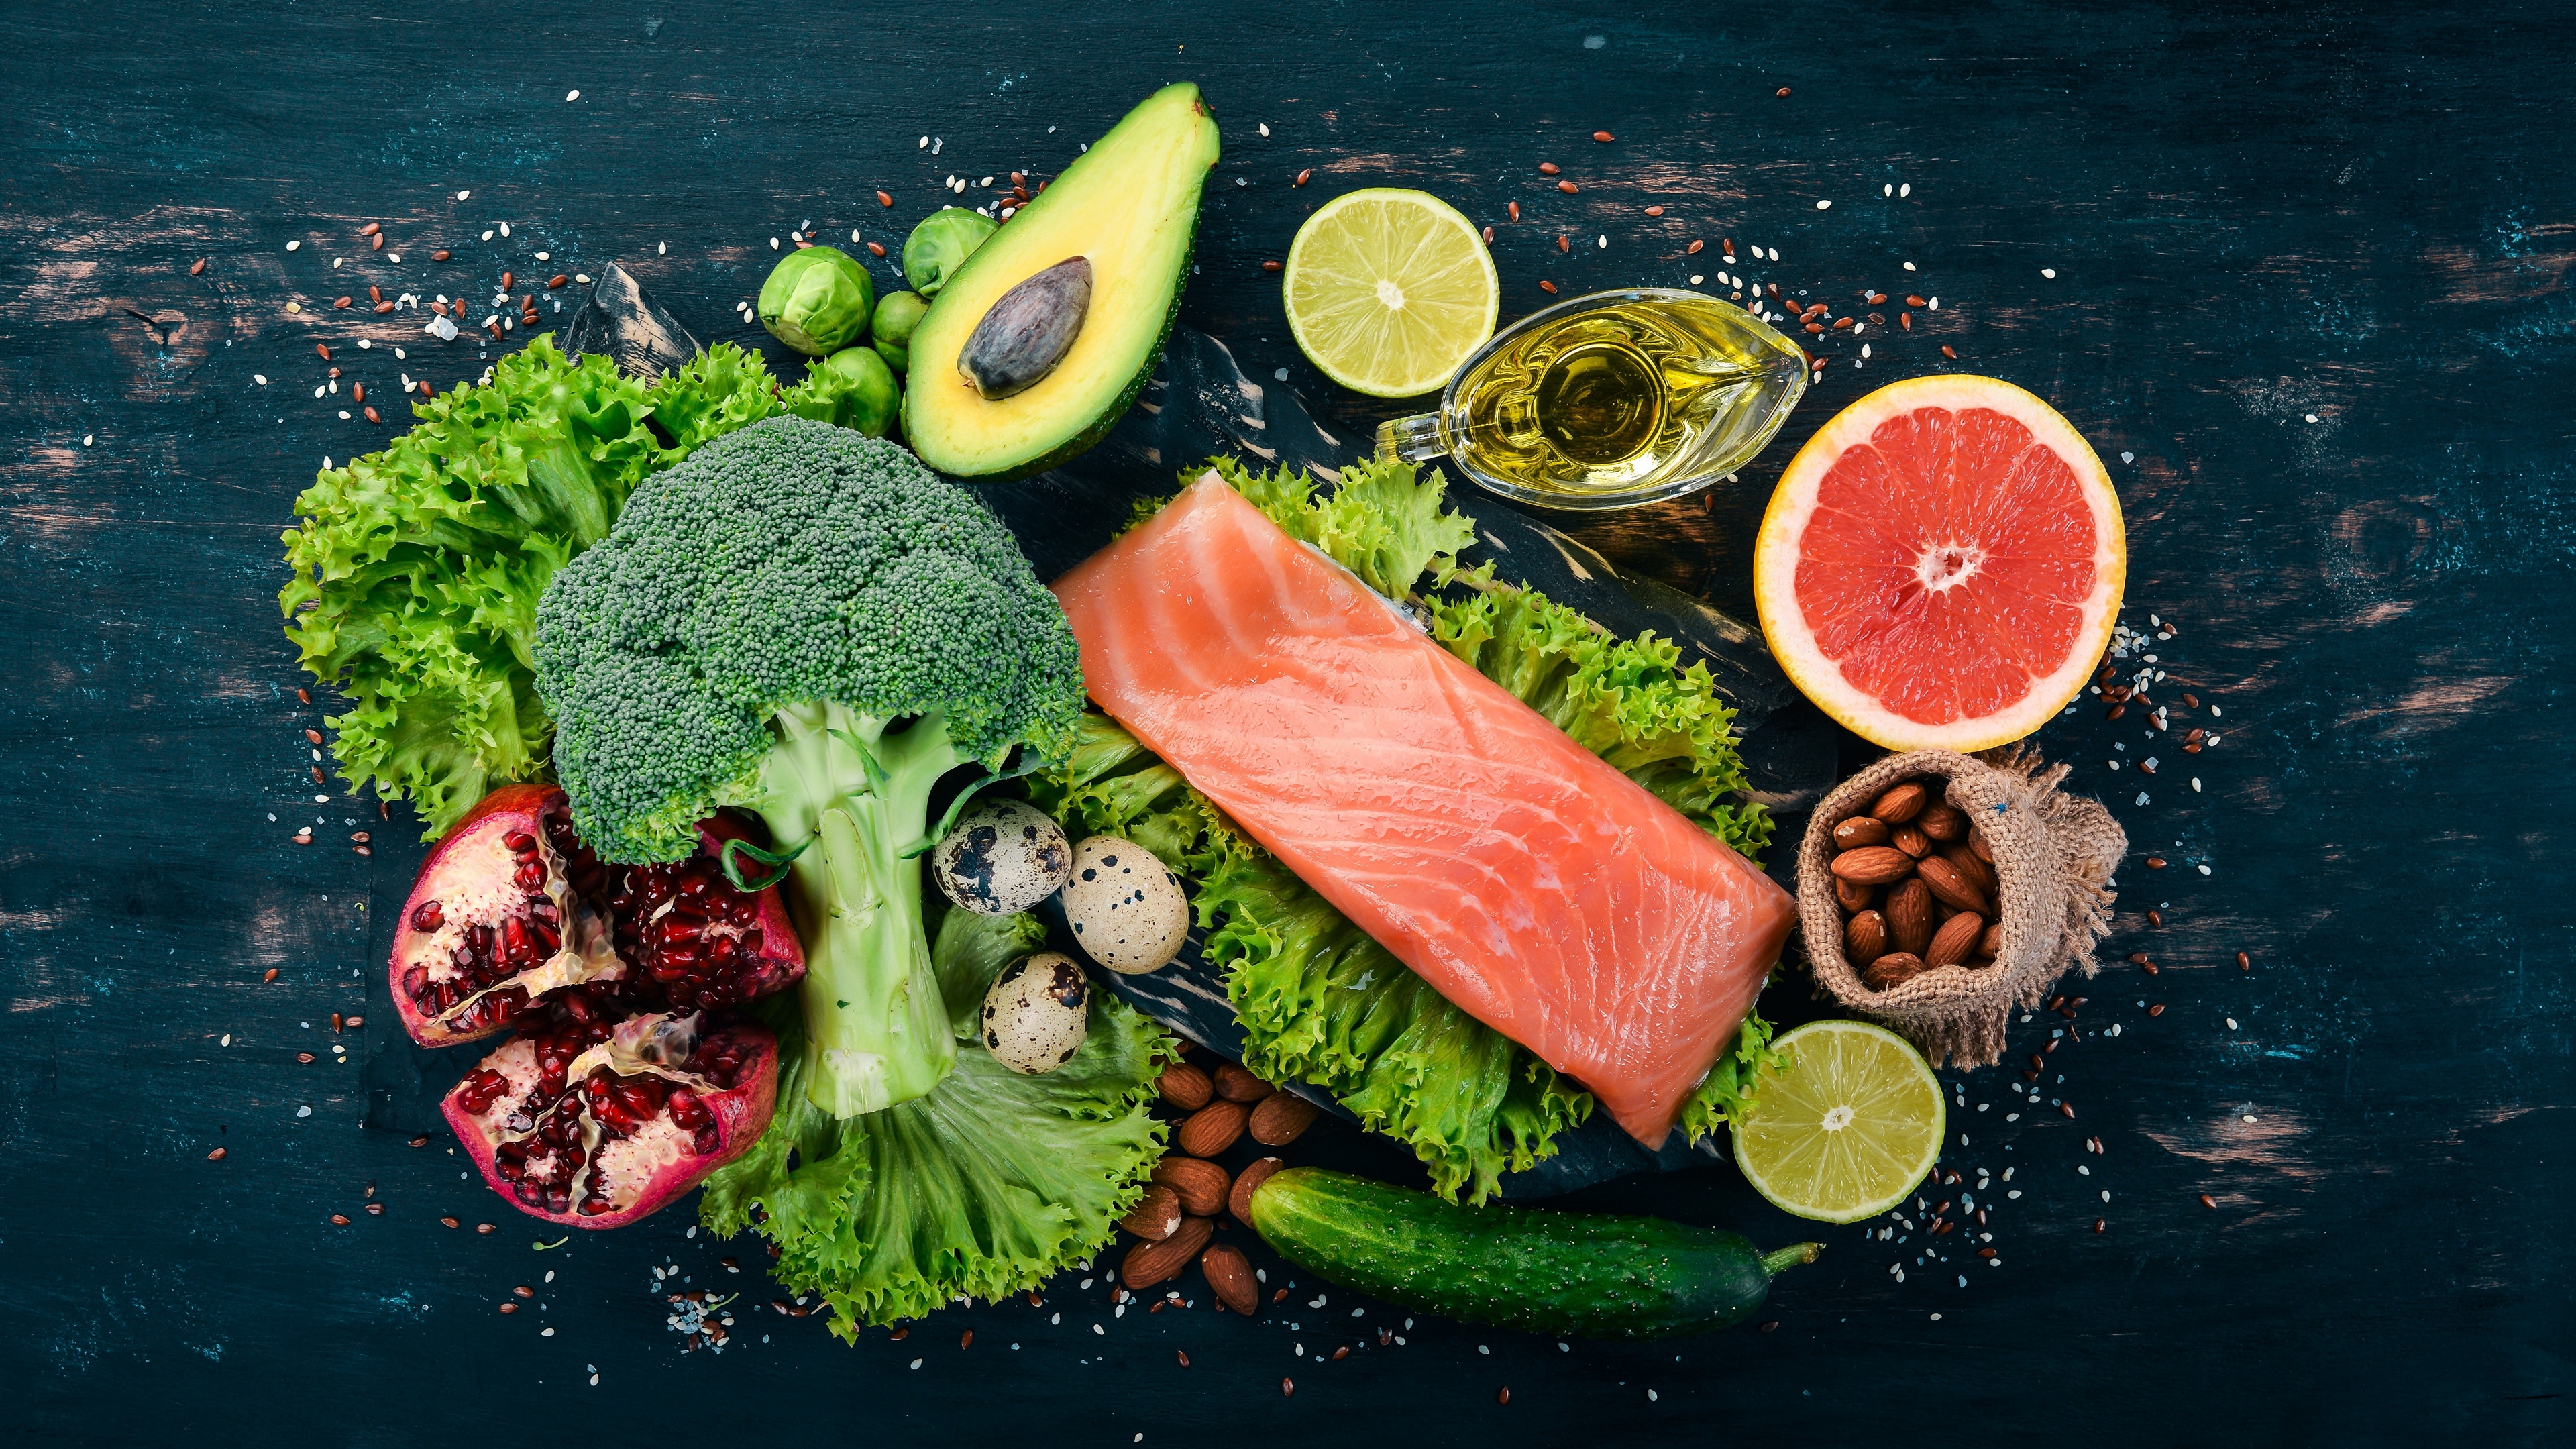 Food Olive Oil Salmon Avocados Cucumbers Lime Pomegranate Almonds Salad Grapefruits Simple Backgroun 3840x2160